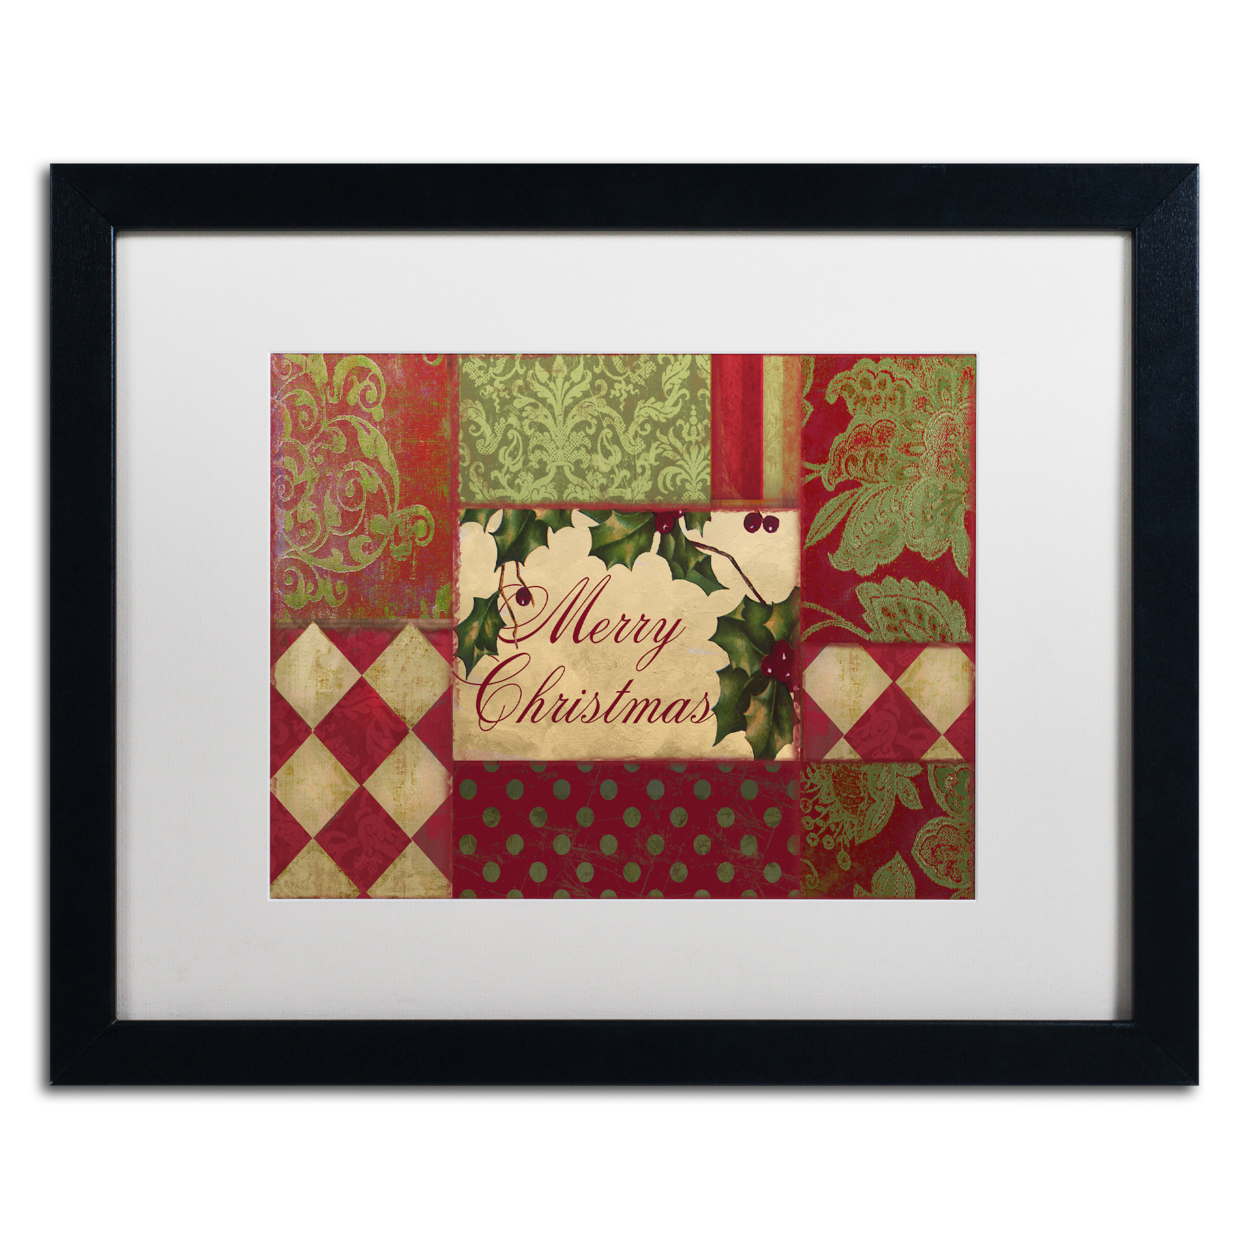 Color Bakery 'Merry Christmas Patchwork I' Black Wooden Framed Art 18 X 22 Inches